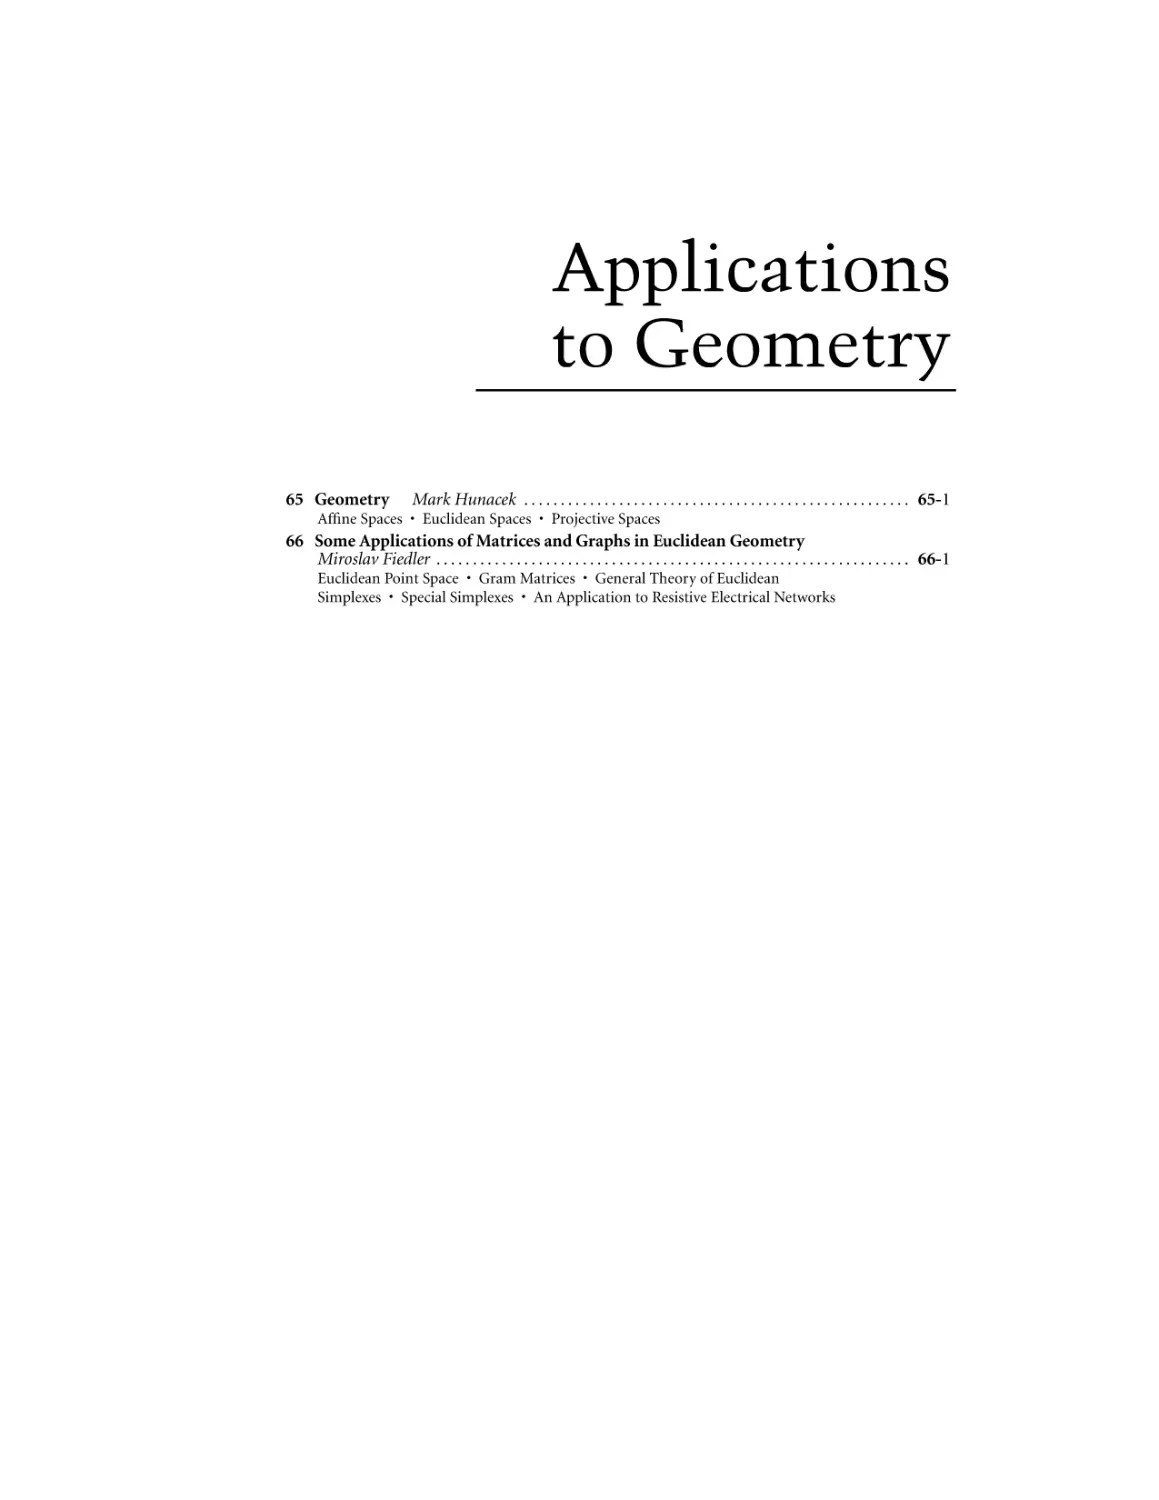 Applications to Geometry